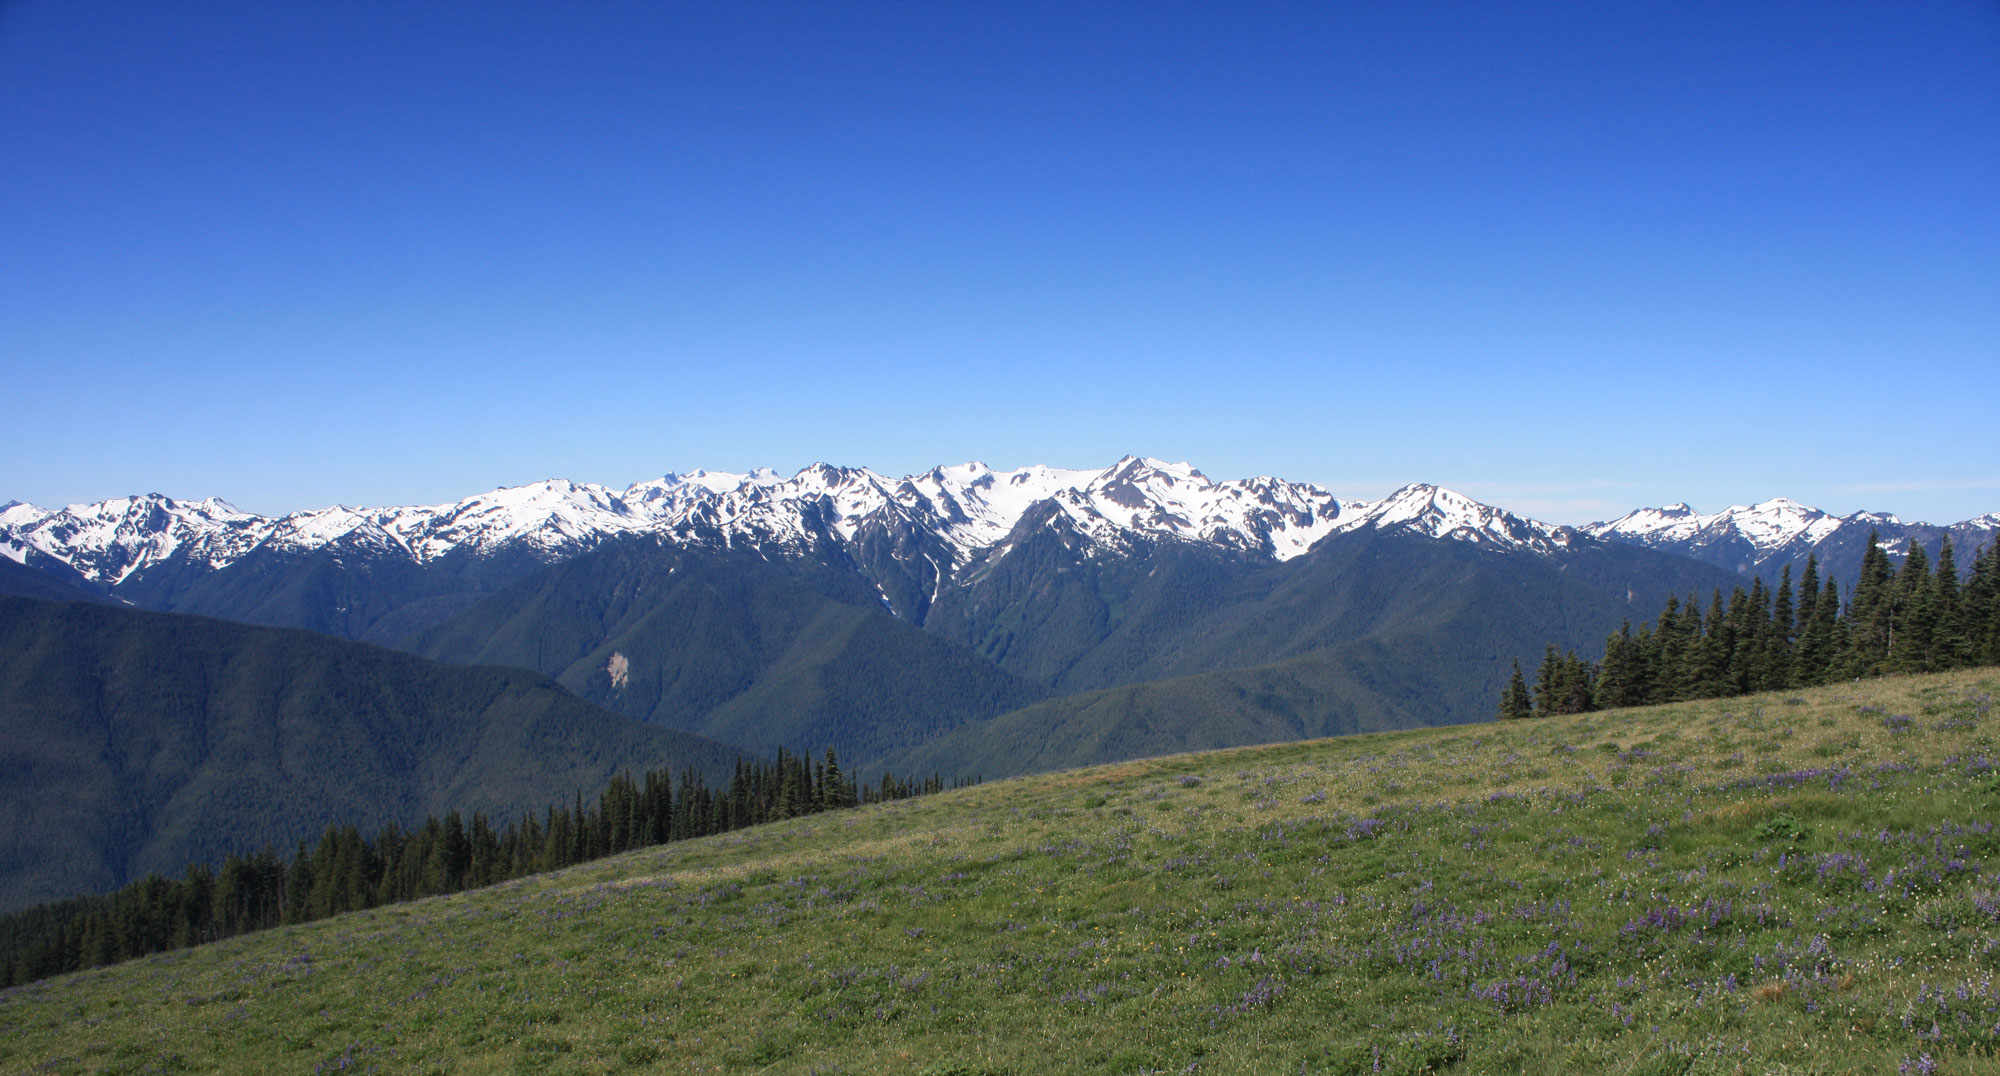 Photograph of the Olympic Mountains in Washington state. The photo shows a gentle, grass-covered slope in the foreground and snow-capped mountain peaks in the distance. 